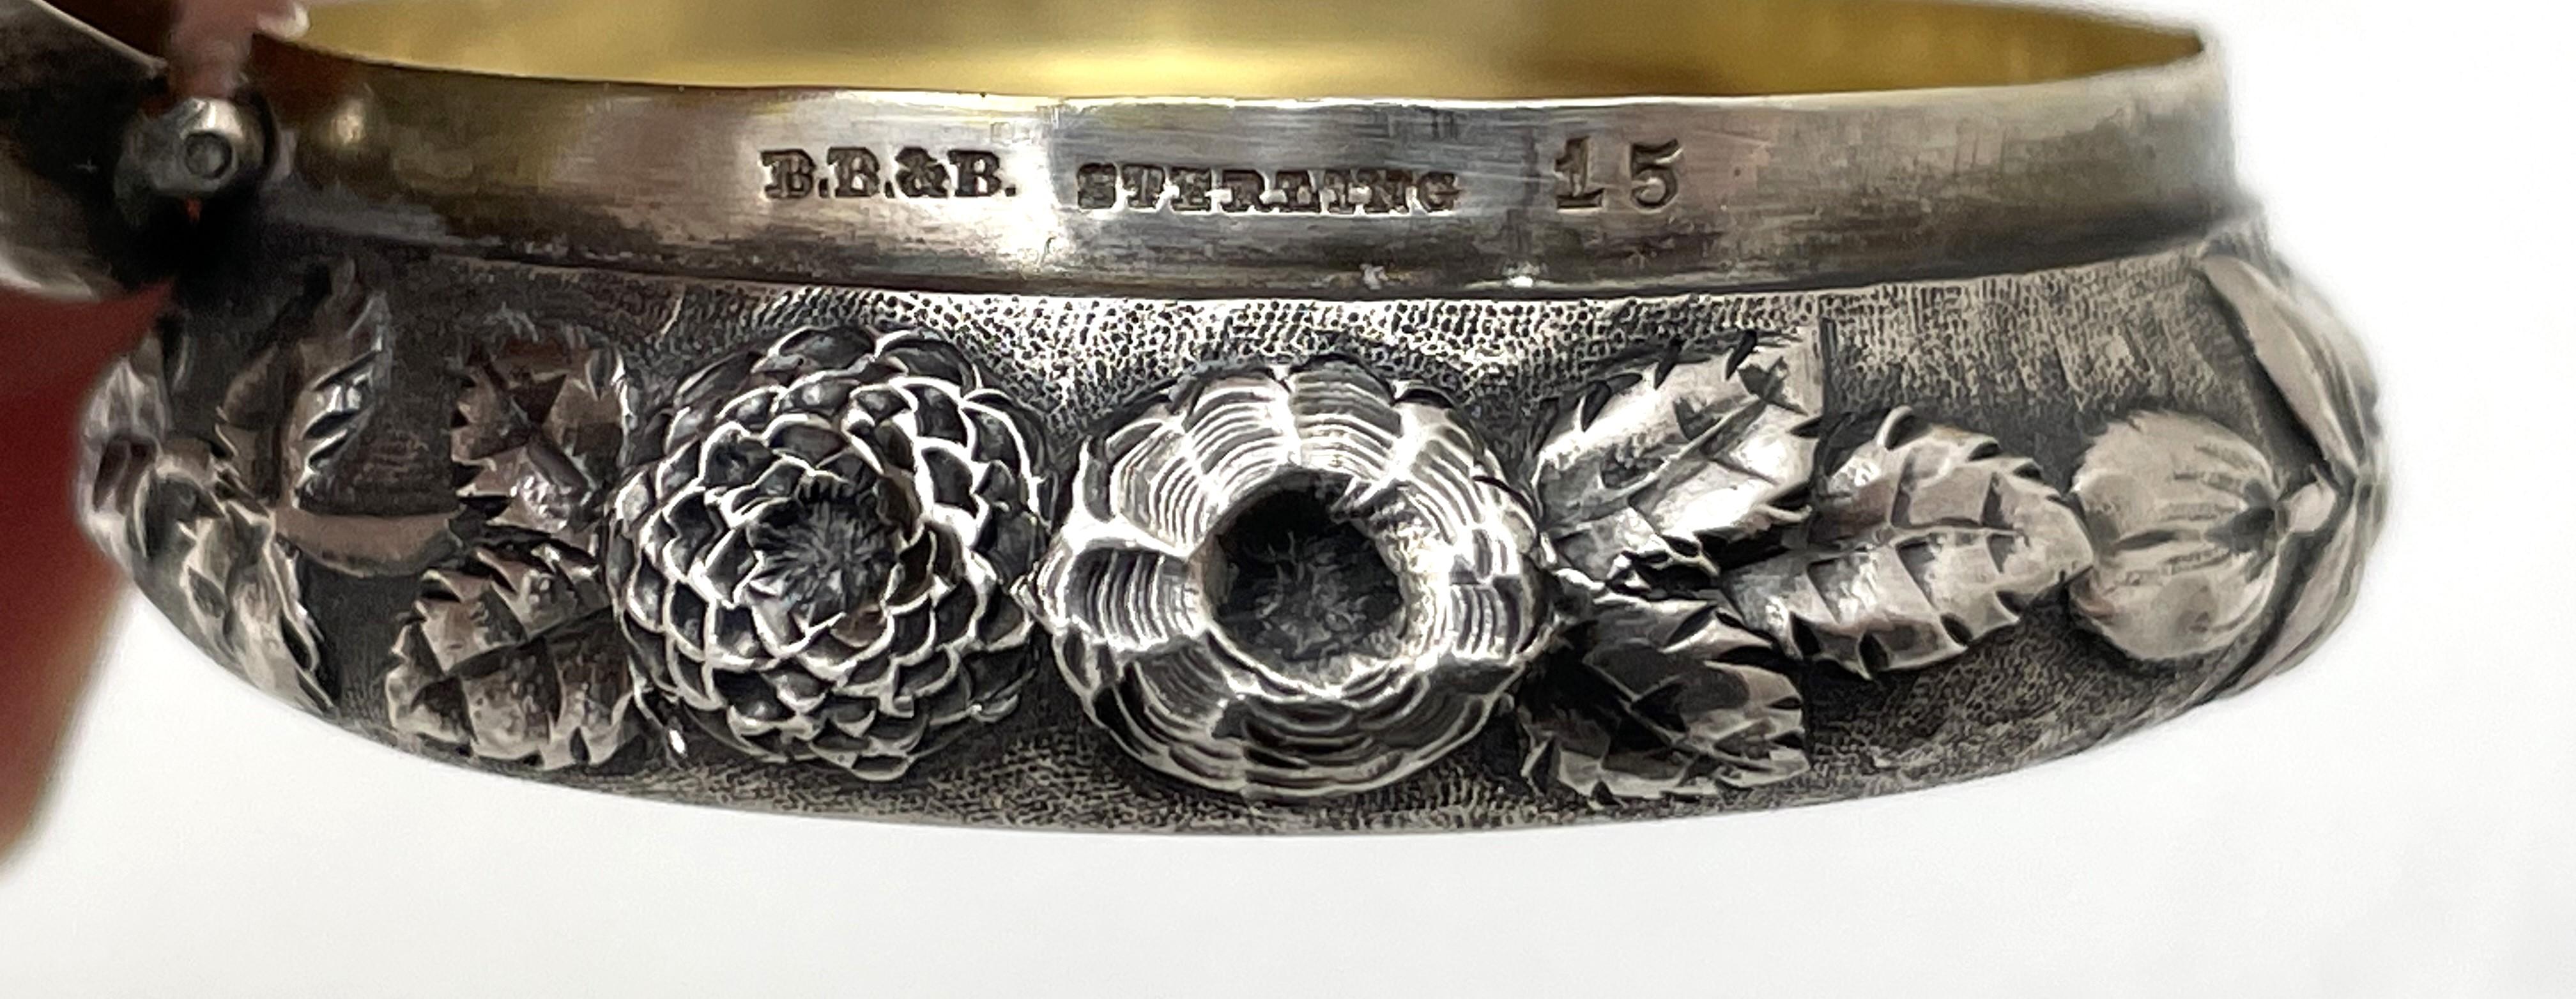 Bailey, Banks & Biddle Repousse Sterling Silver Pill Box from Late 19th Century For Sale 2